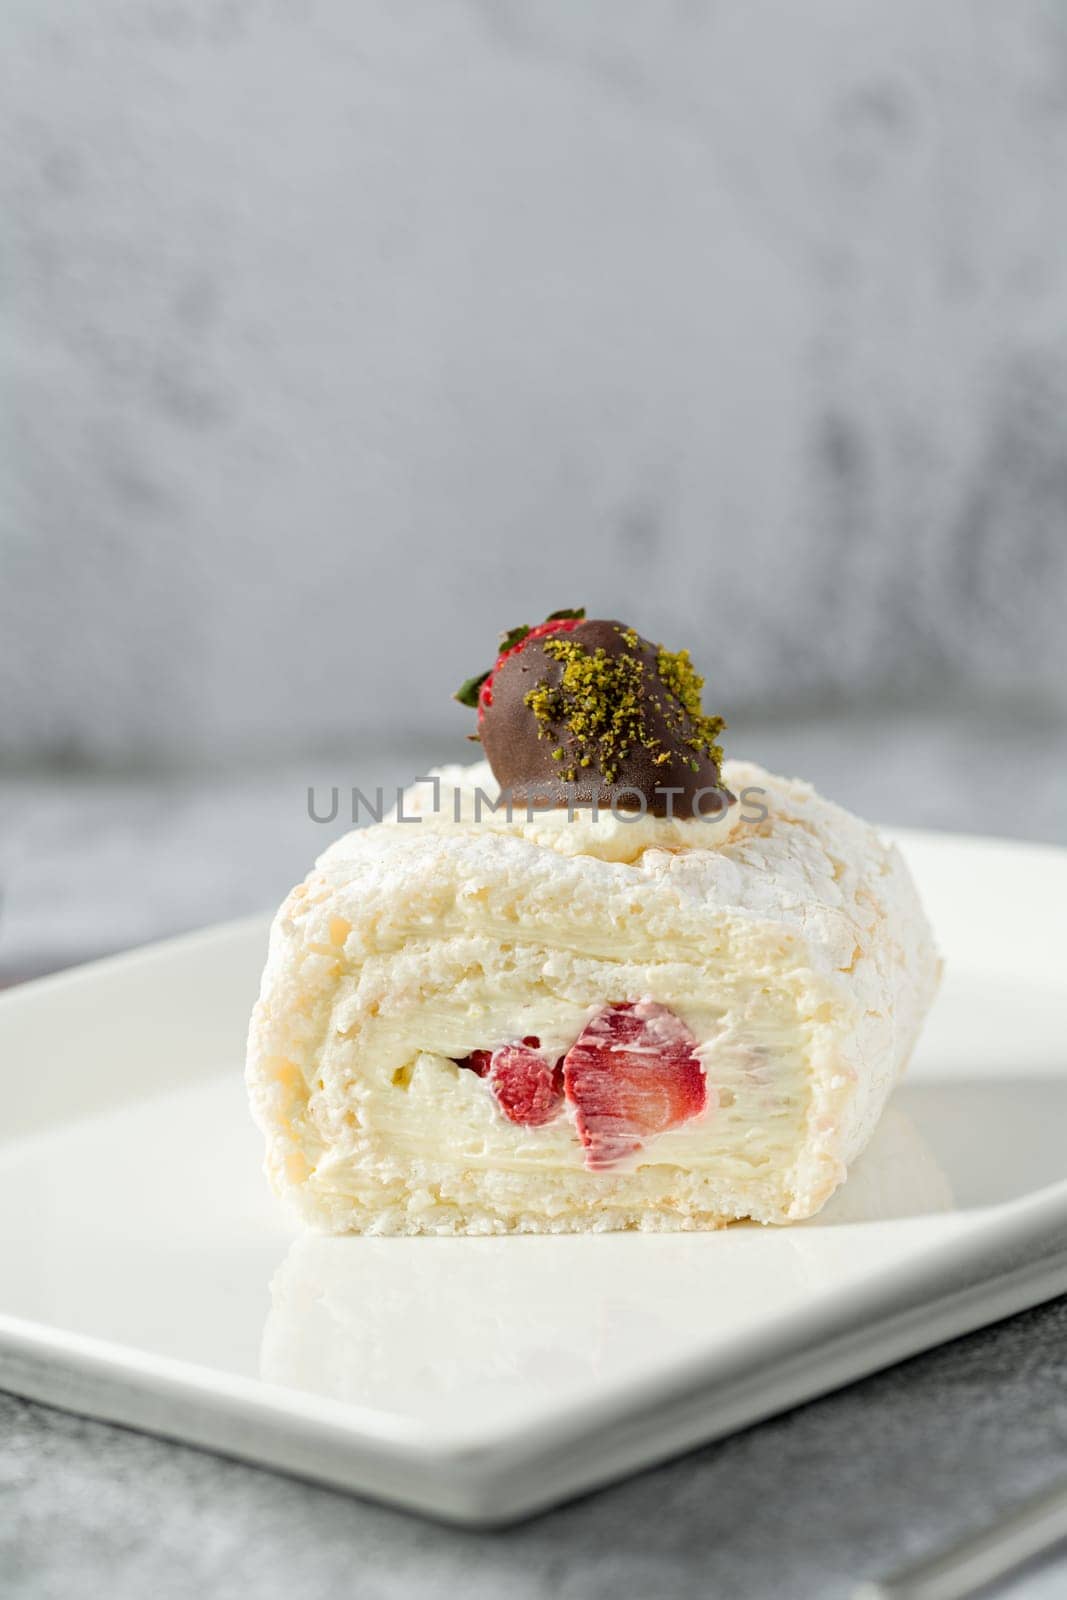 Strawberry roll cake with tea next to it on stone table by Sonat